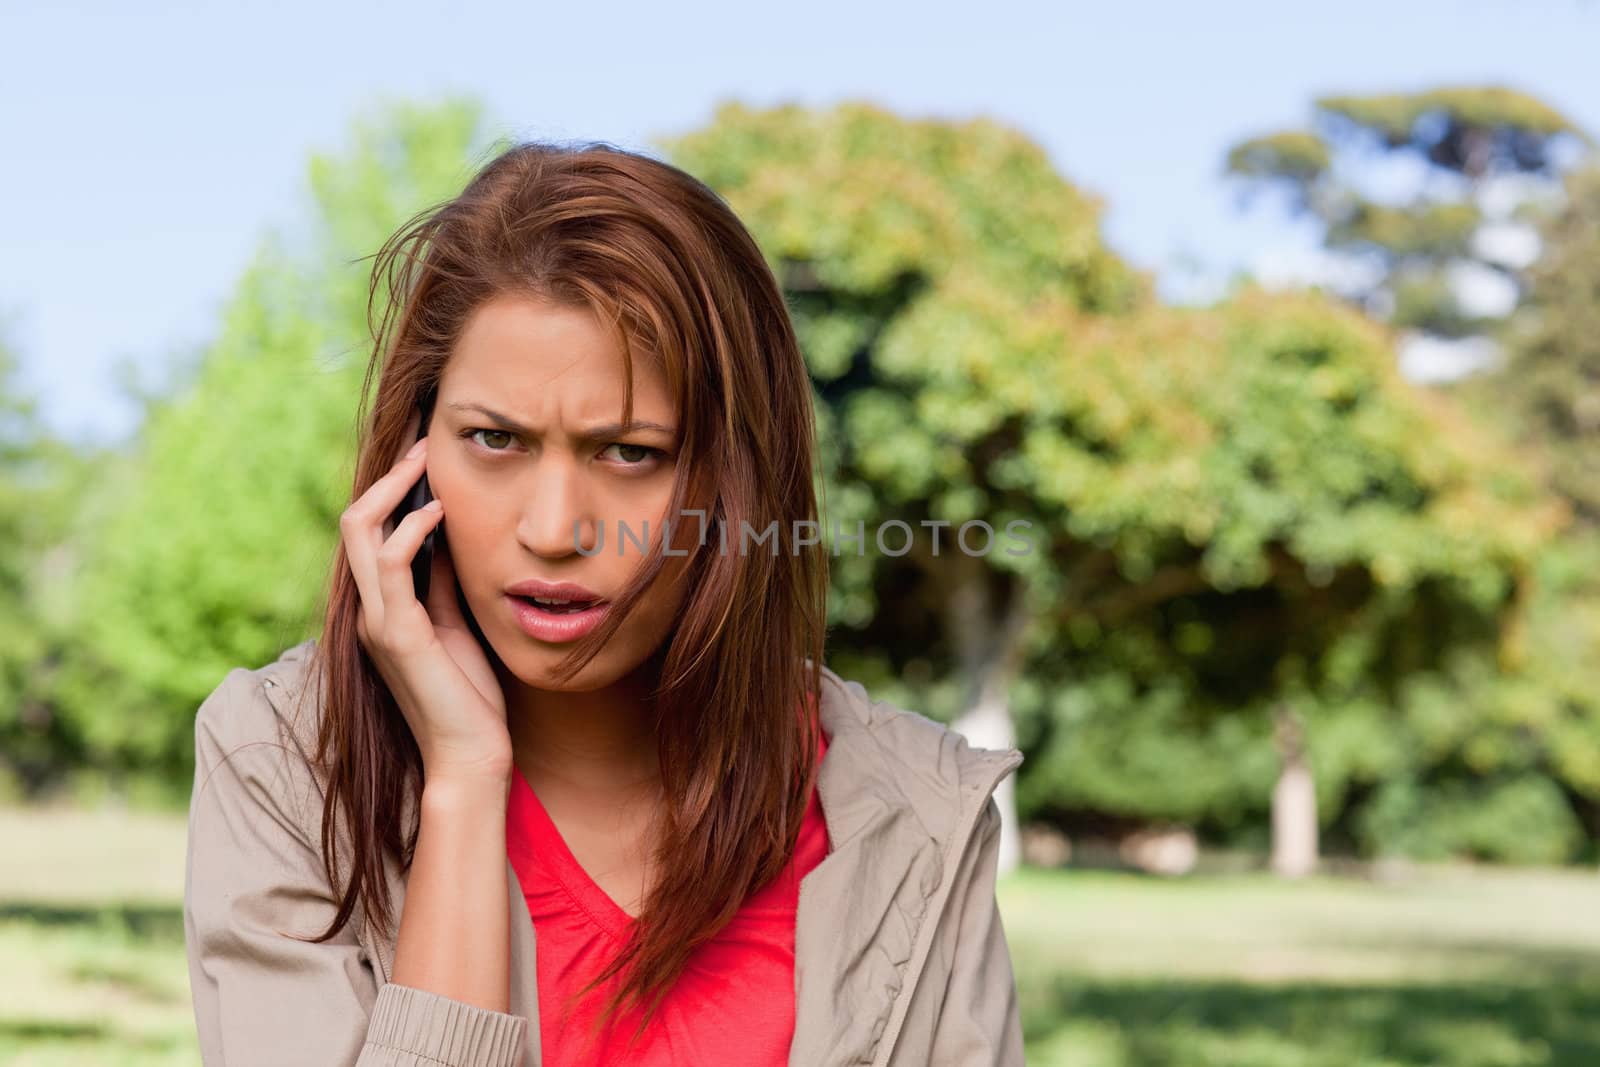 Woman with a serious expression talking on the phone in a bright by Wavebreakmedia